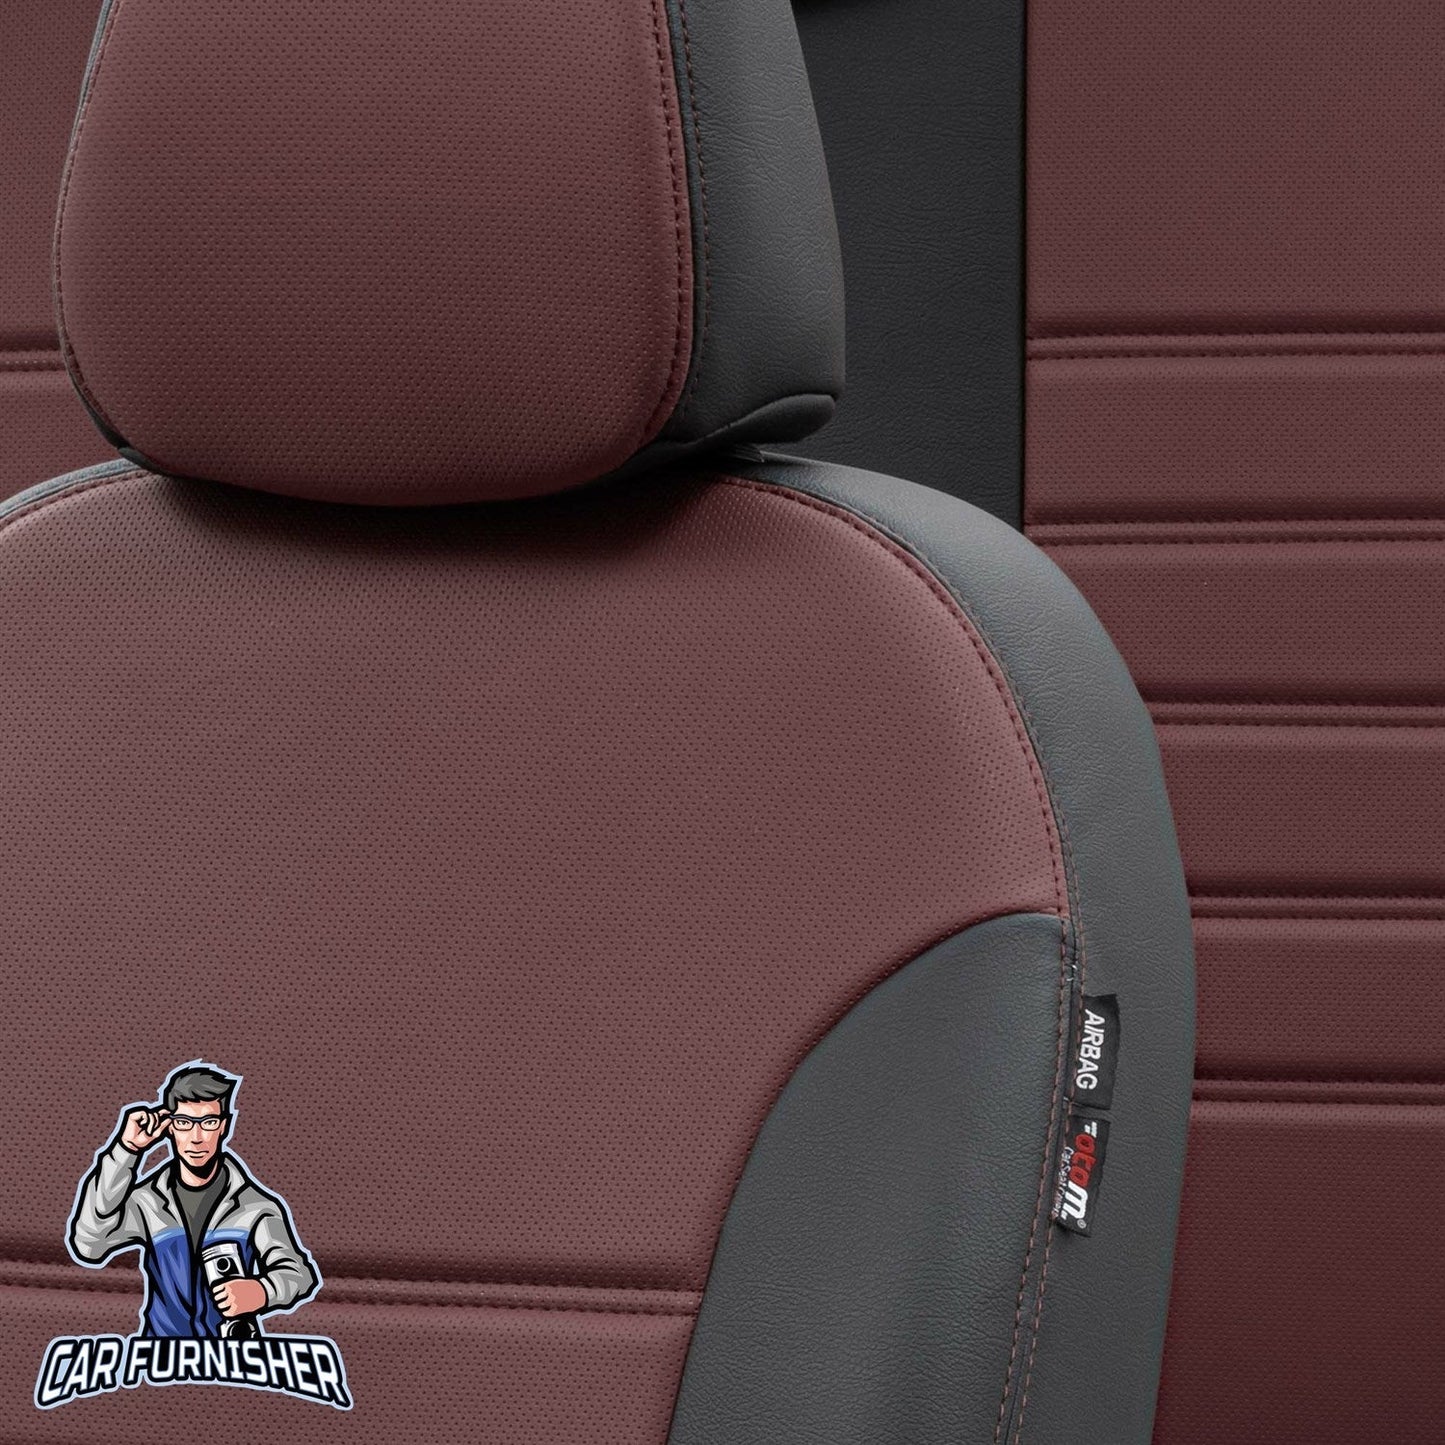 Citroen Nemo Seat Covers Istanbul Leather Design Burgundy Leather